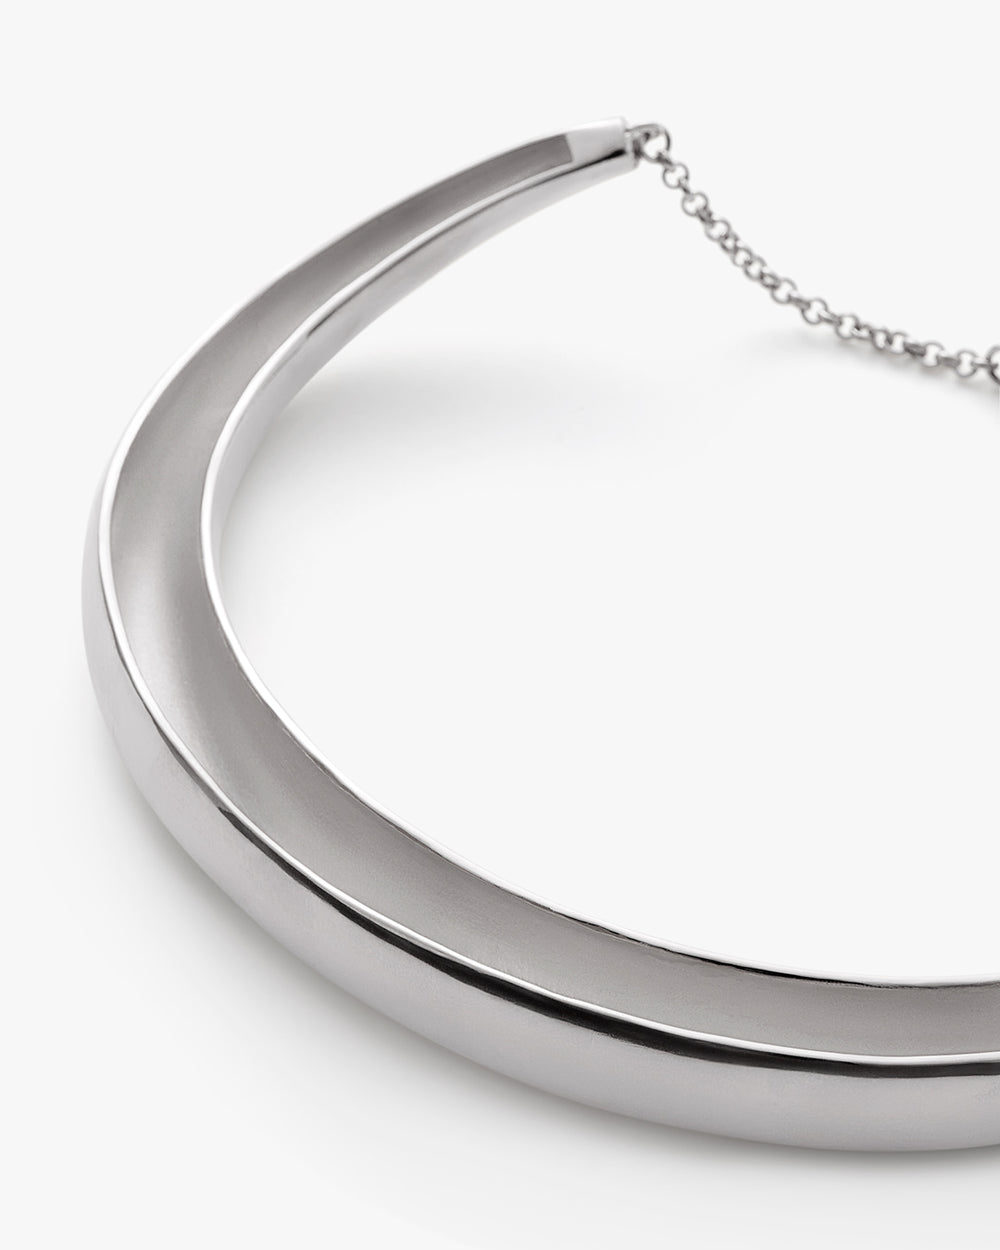 Metallic necklace with a curved design and attached chain.